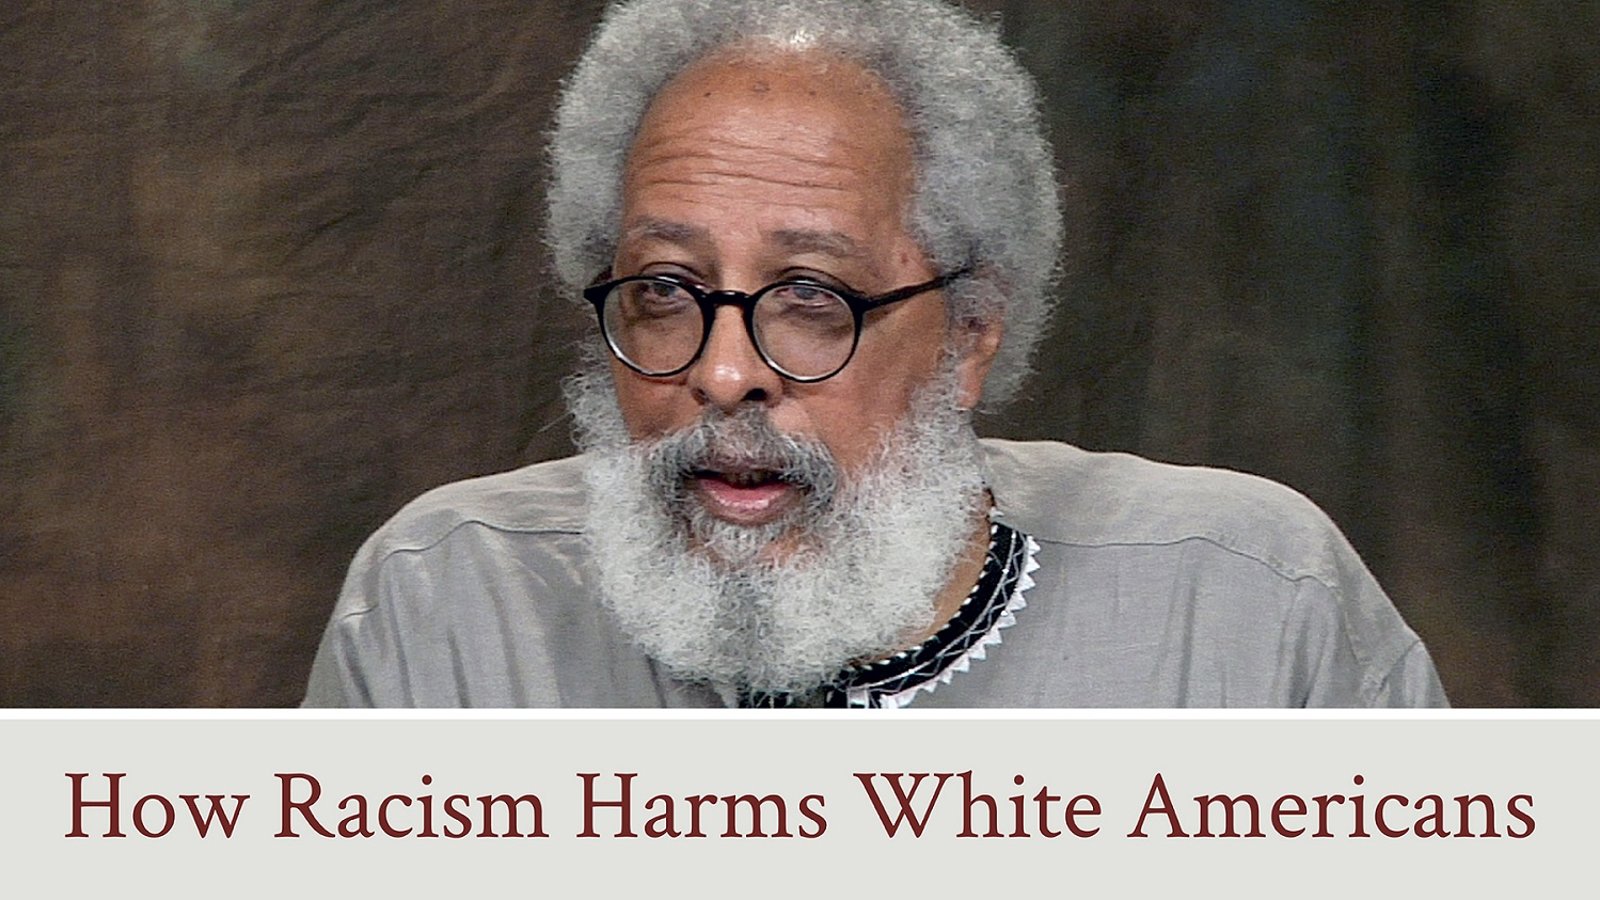 How Racism Harms White Americans - A lecture by John H. Bracey